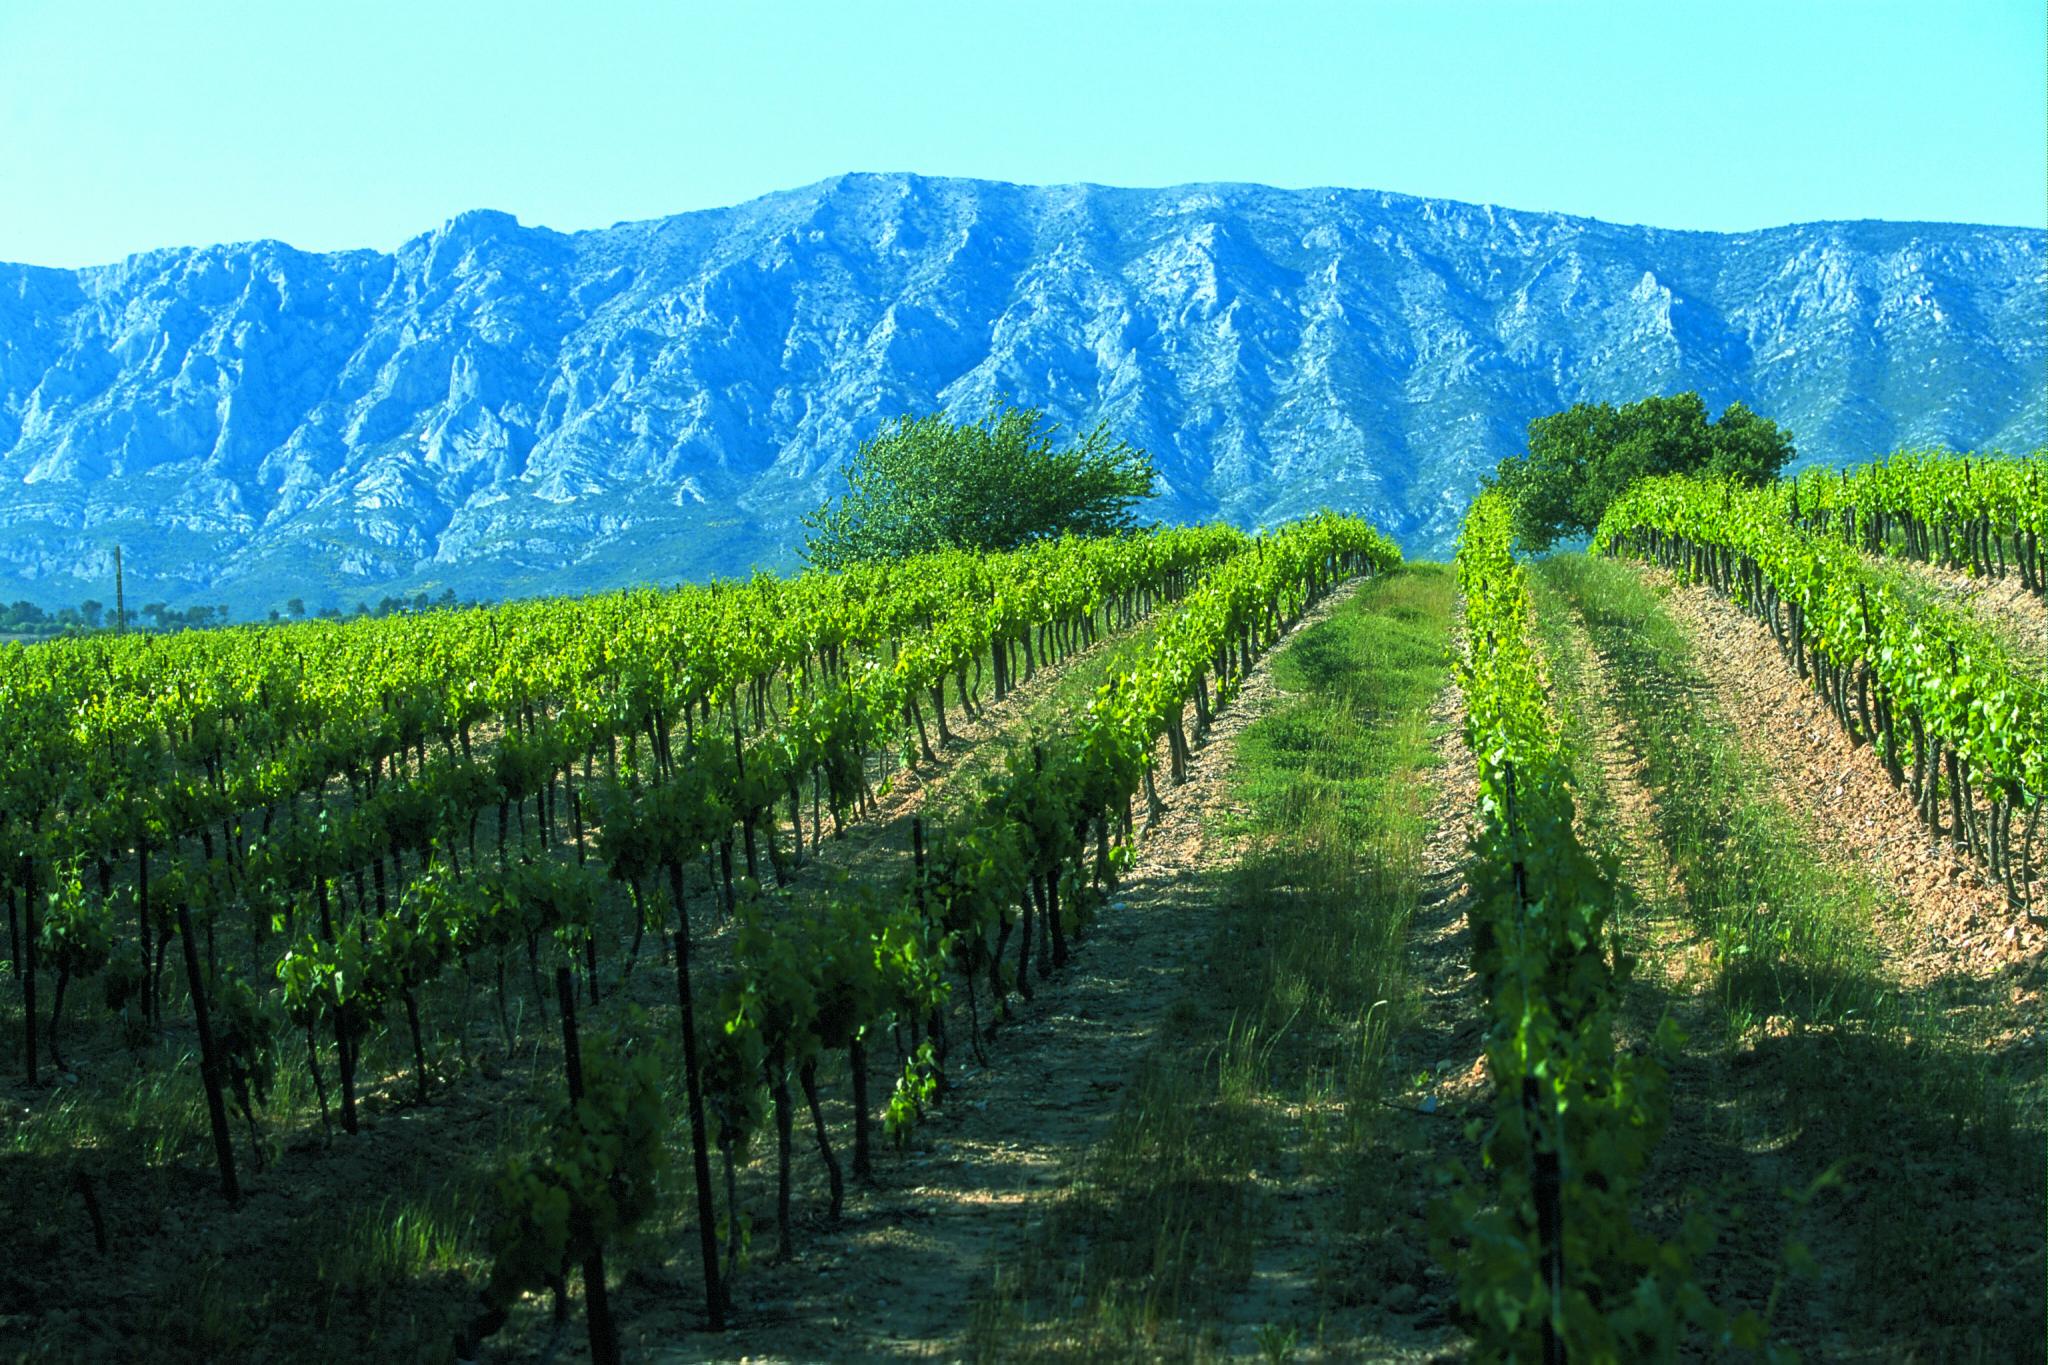 A contrasting terroir at the foot of the Sainte Victoire Mountain